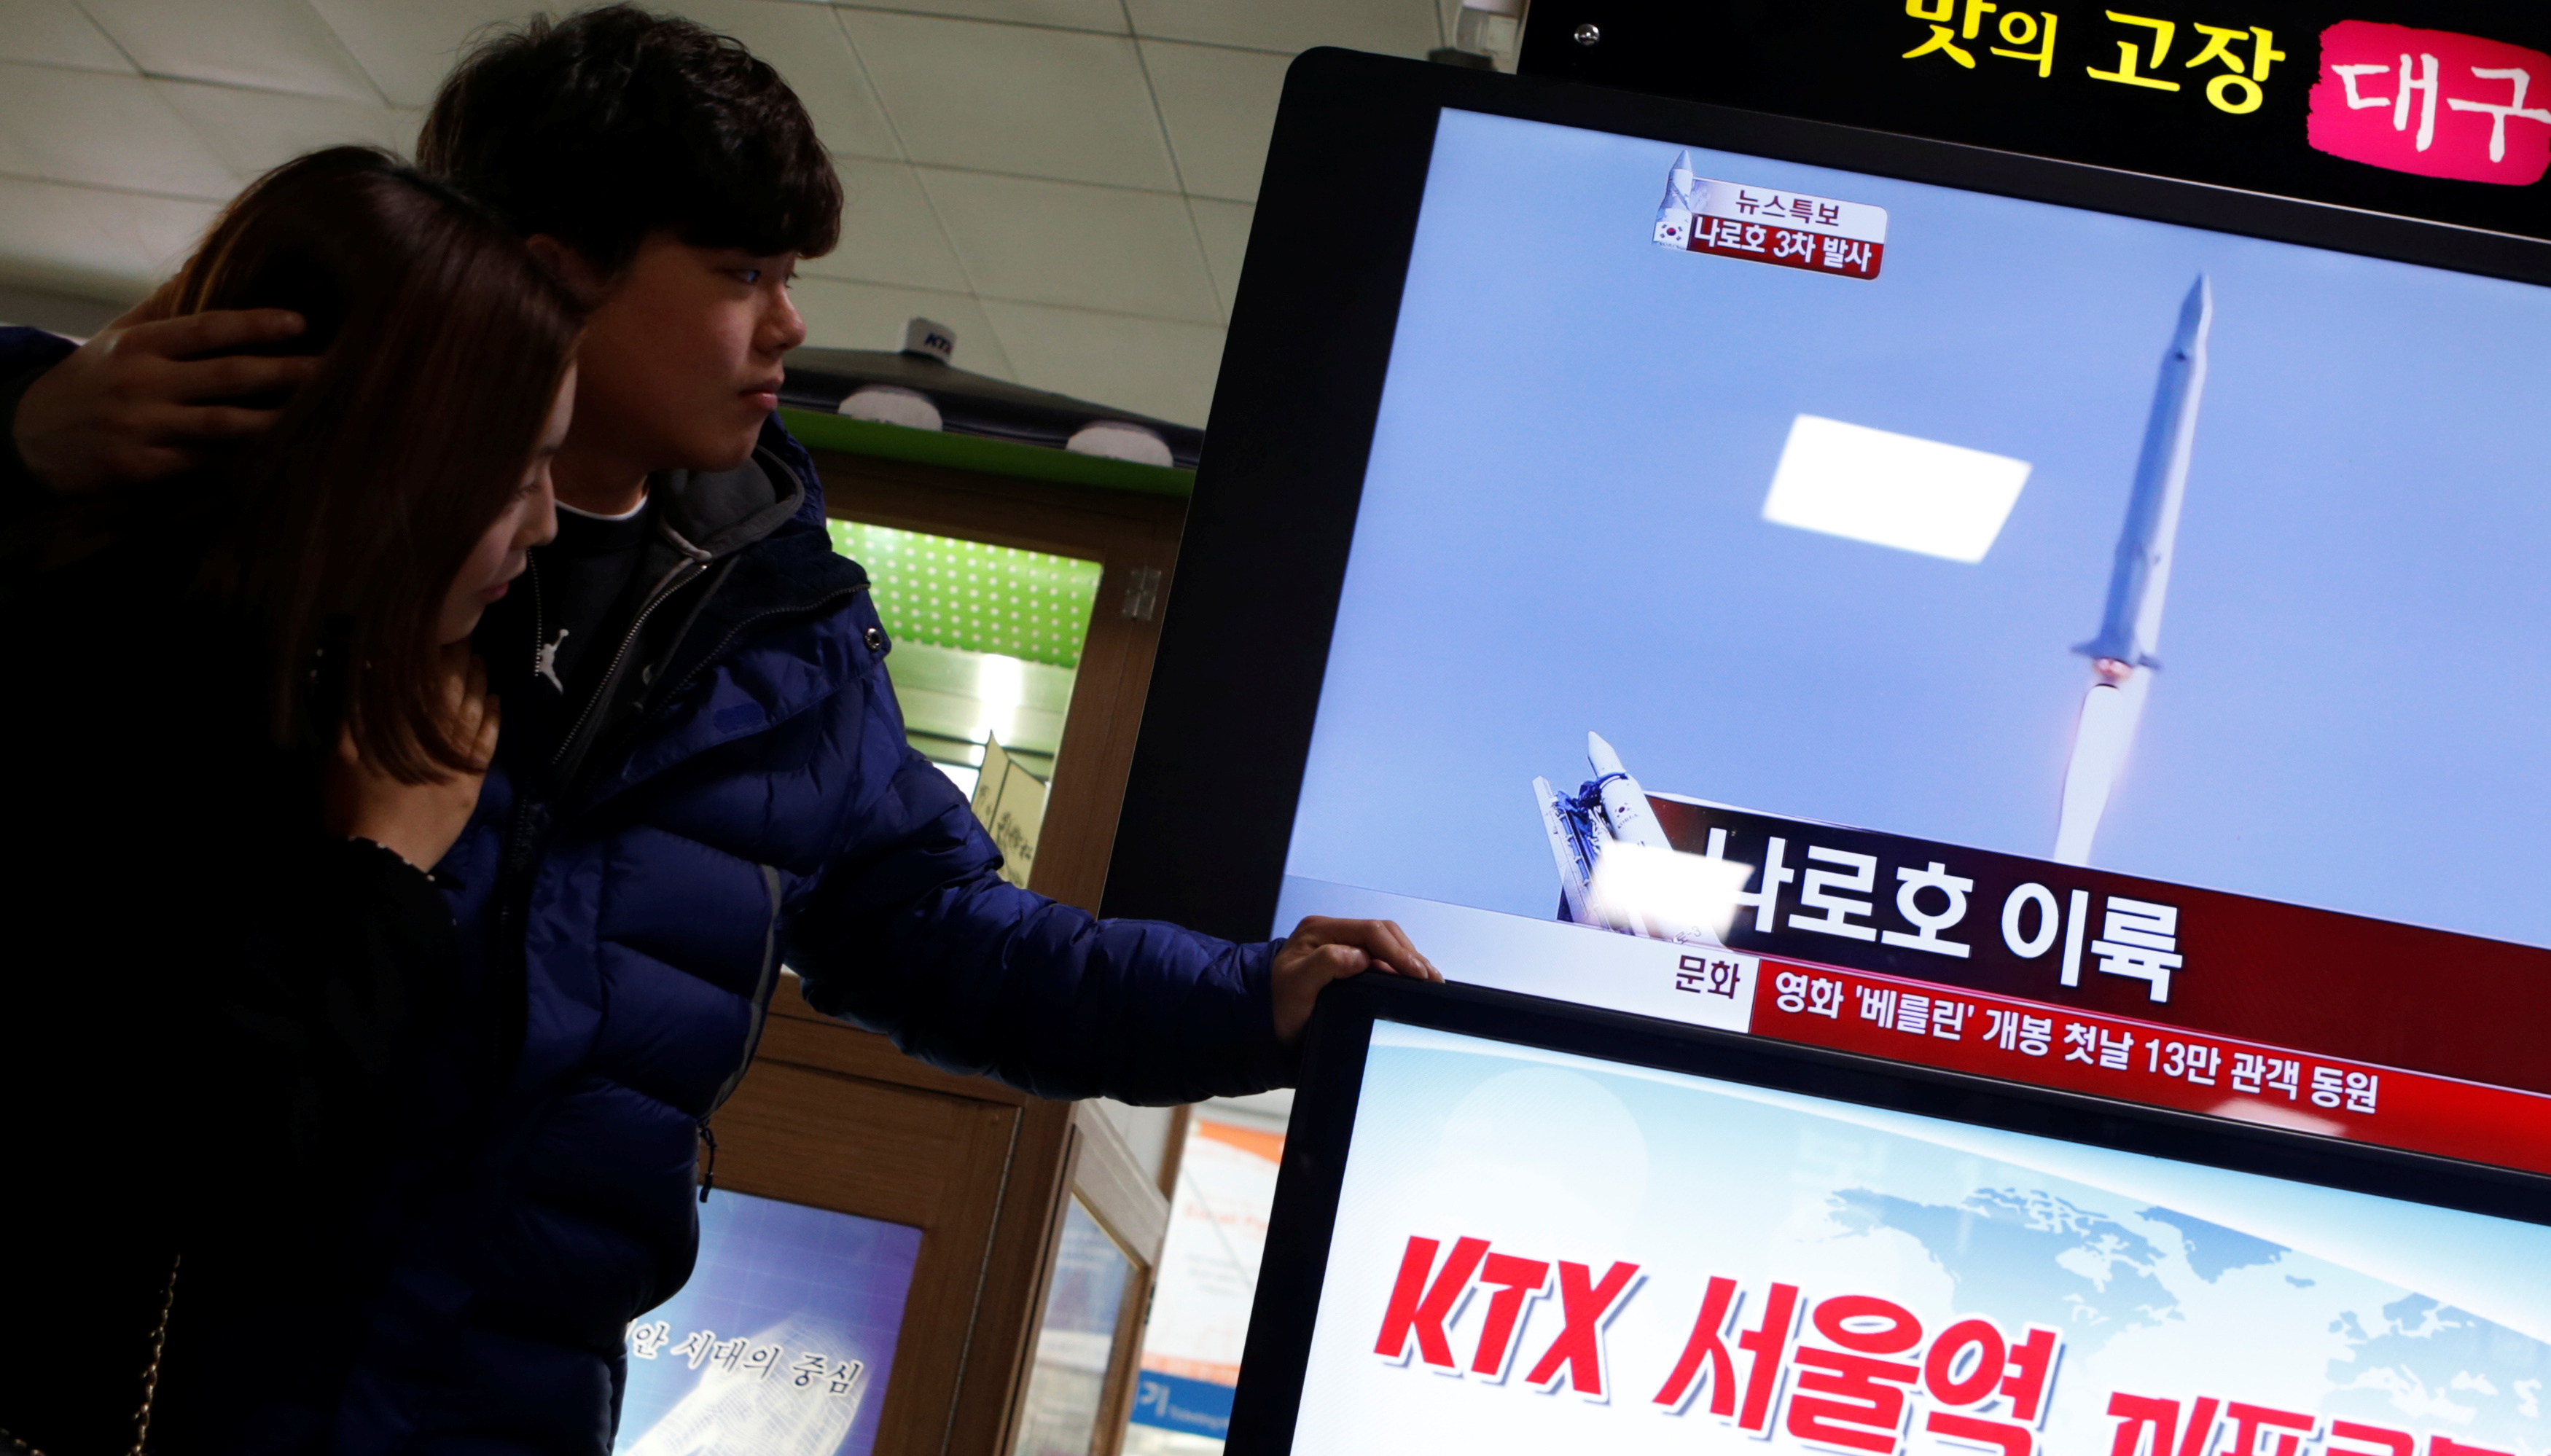 A couple watch a television report broadcasting the launch of South Korea's space rocket Korea Space Launch Vehicle-1 (KSLV-1) or Naro at Naro Space Centre in Goheung, about 485 km (301 miles) south of Seoul, at a train station in Seoul January 30, 2013.  REUTERS/Lee Jae-Won (SOUTH KOREA - Tags: SCIENCE TECHNOLOGY POLITICS)/File Photo